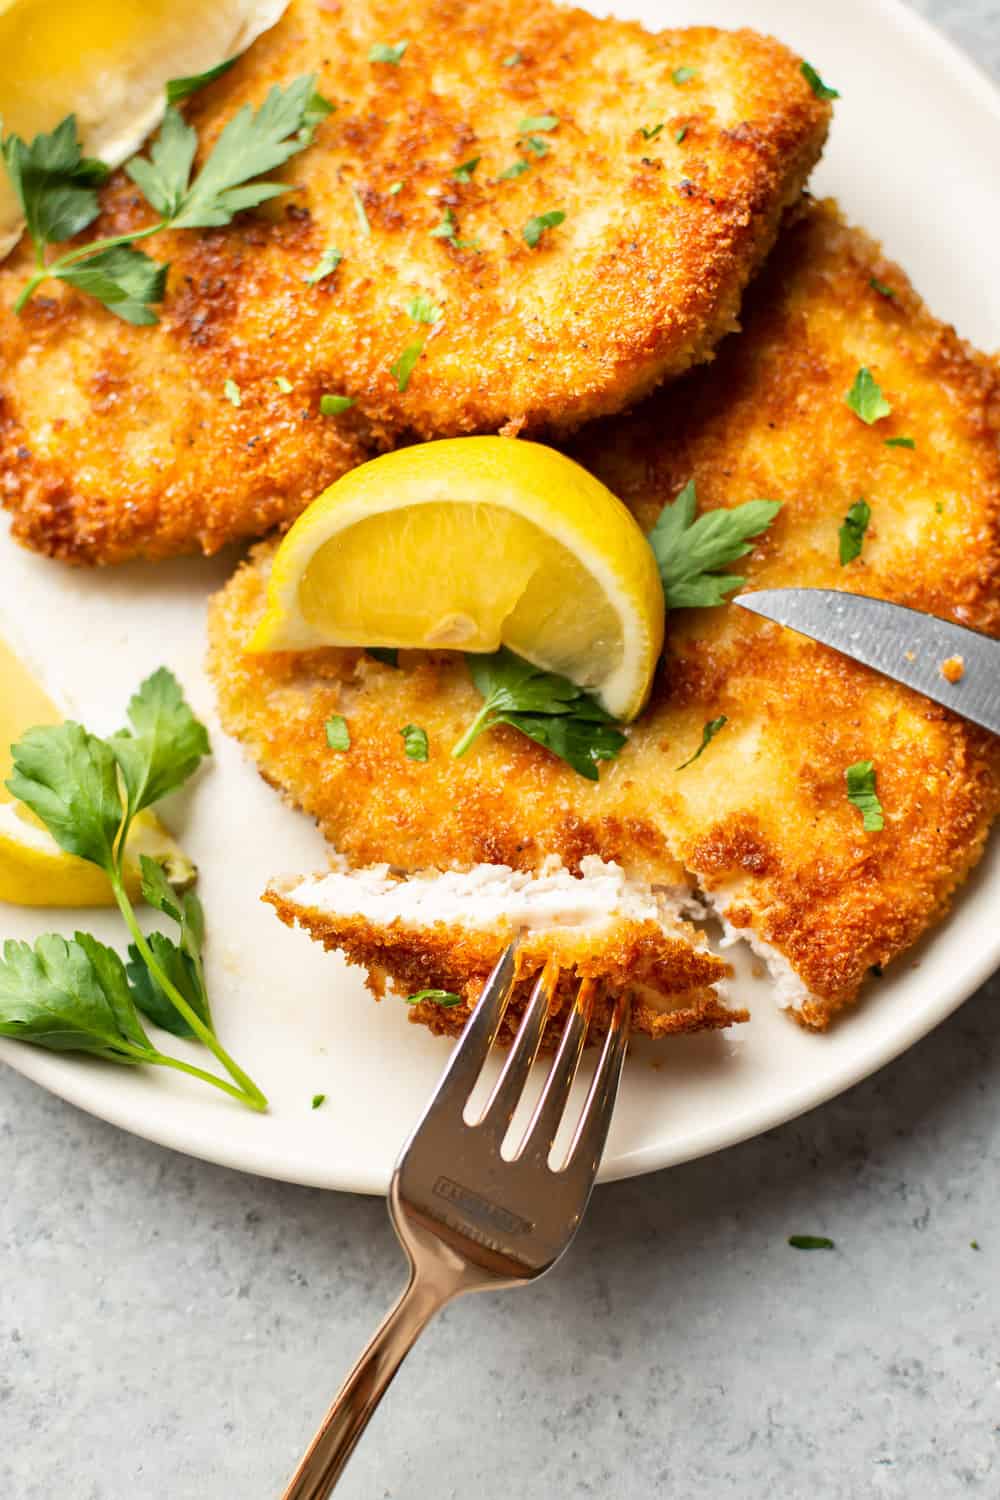 pork schnitzels on a plate with lemon wedges and one schnitzel cut into showing a bite on a fork